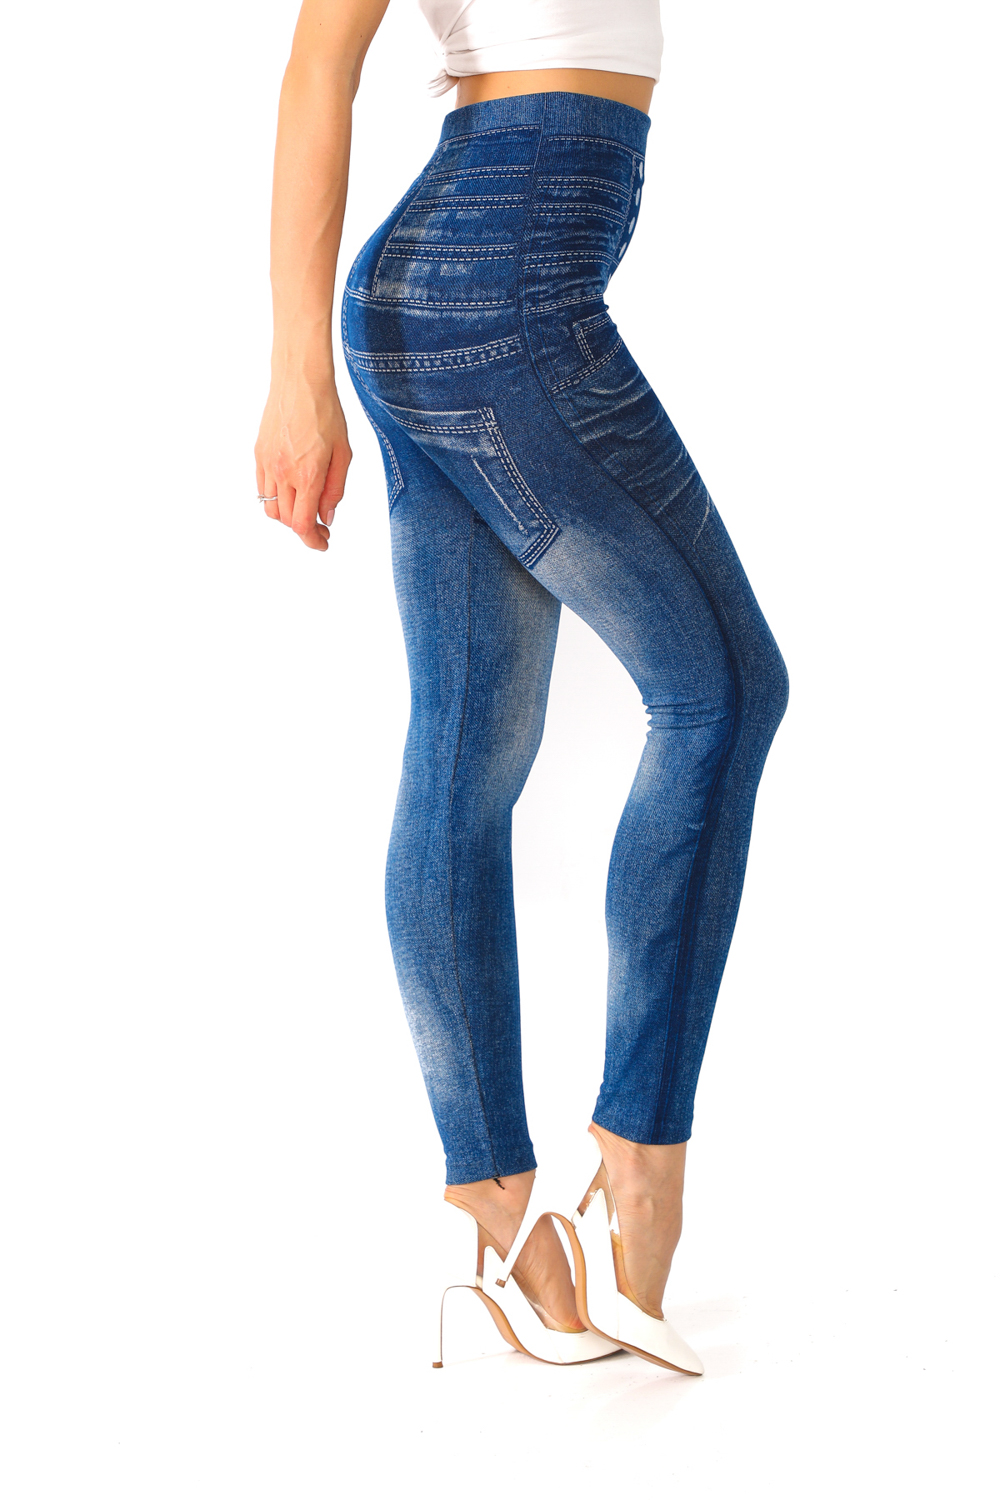 Faux Jeans Leggings with Fake Pockets and Buttons Pattern - Its All Leggings